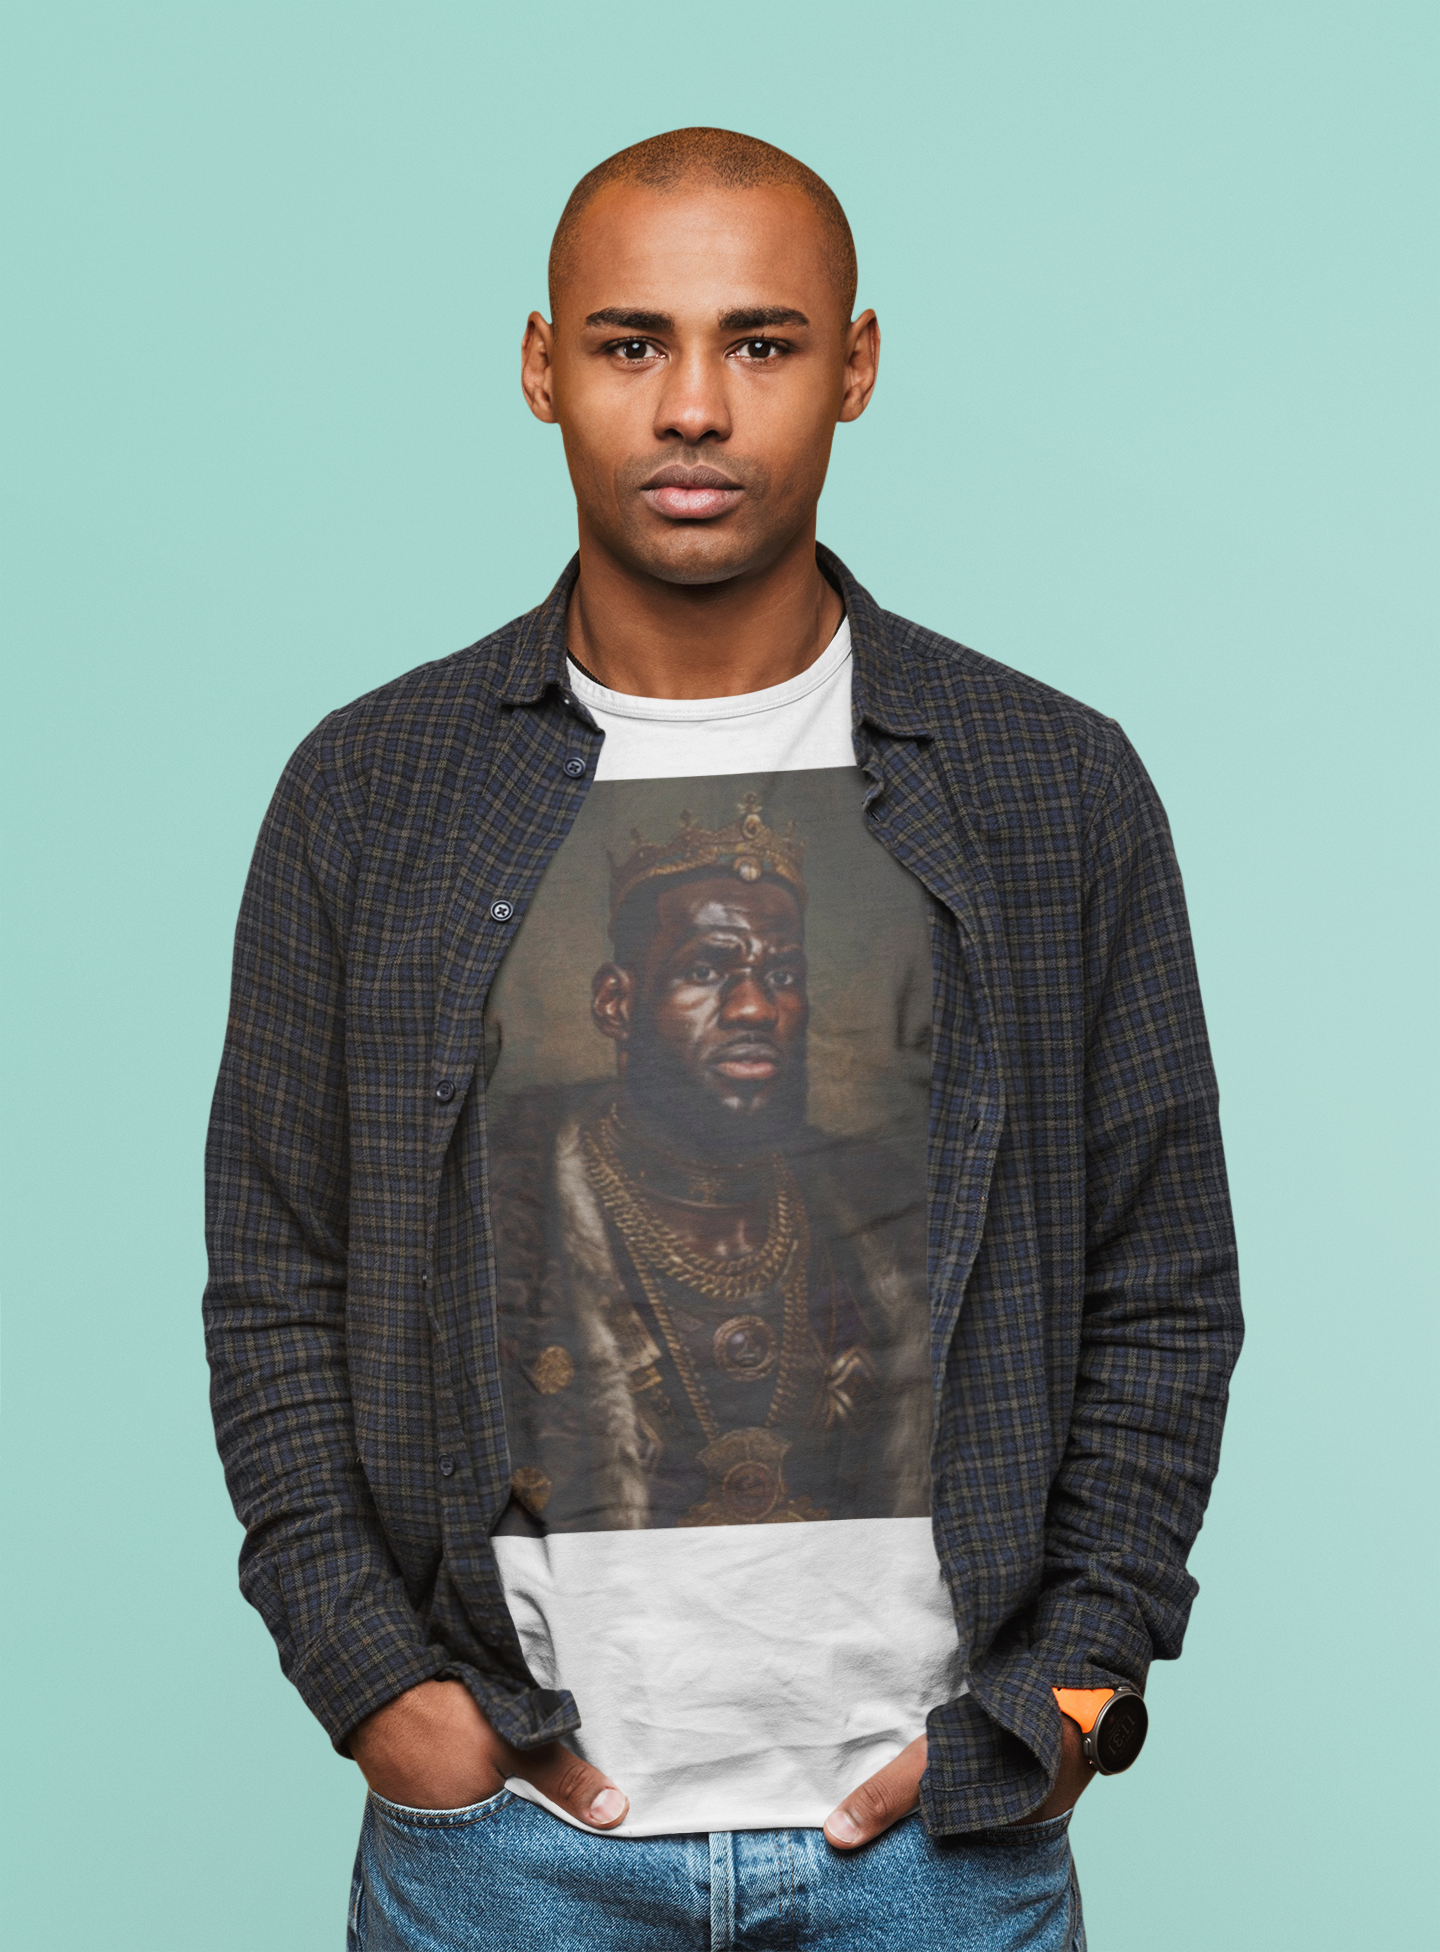 The image showcases the sophisticated unisex softstyle t-shirt, featuring a detailed and artistically rendered portrait of King James in the style of a Renaissance painting. The quality of the softstyle material is evident, promising comfort and durability, while the design speaks to the blend of sports legacy and classical elegance.